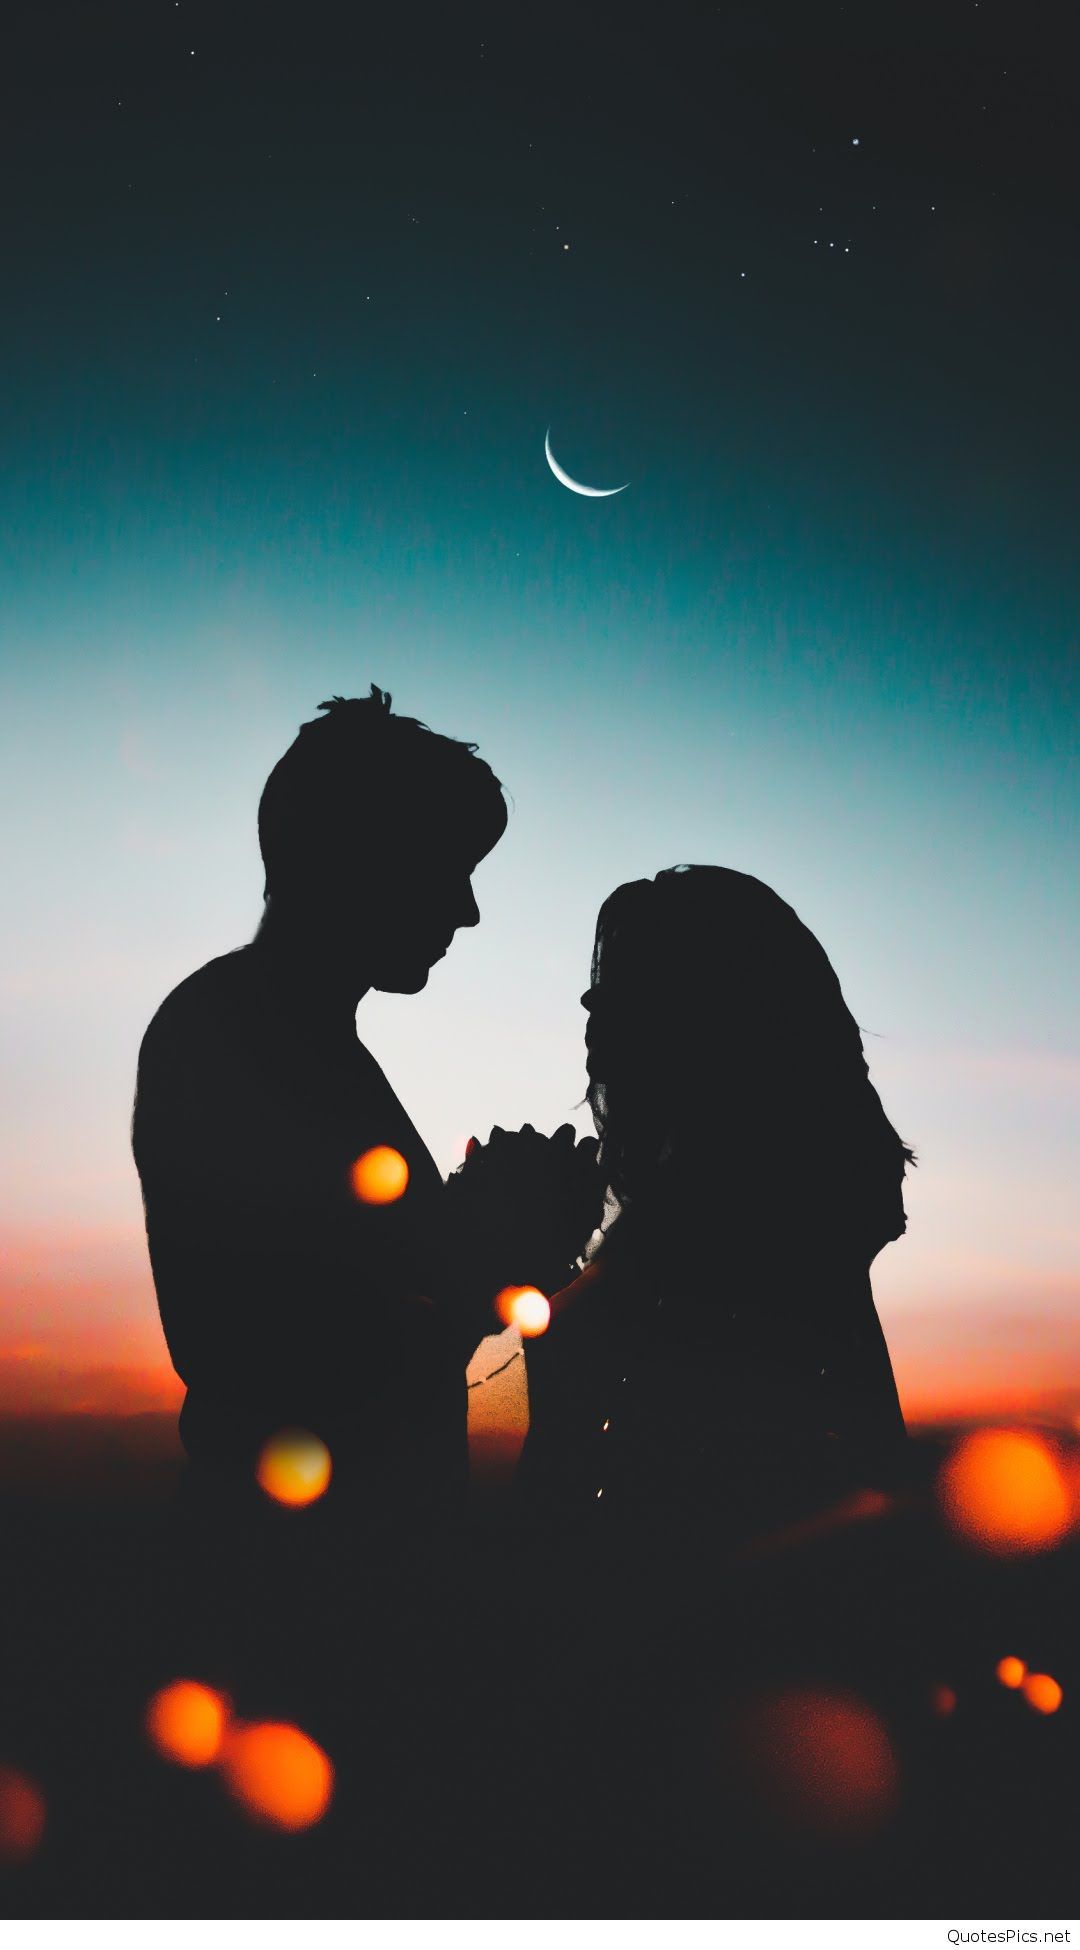 Romantic Image Free Download For Mobile